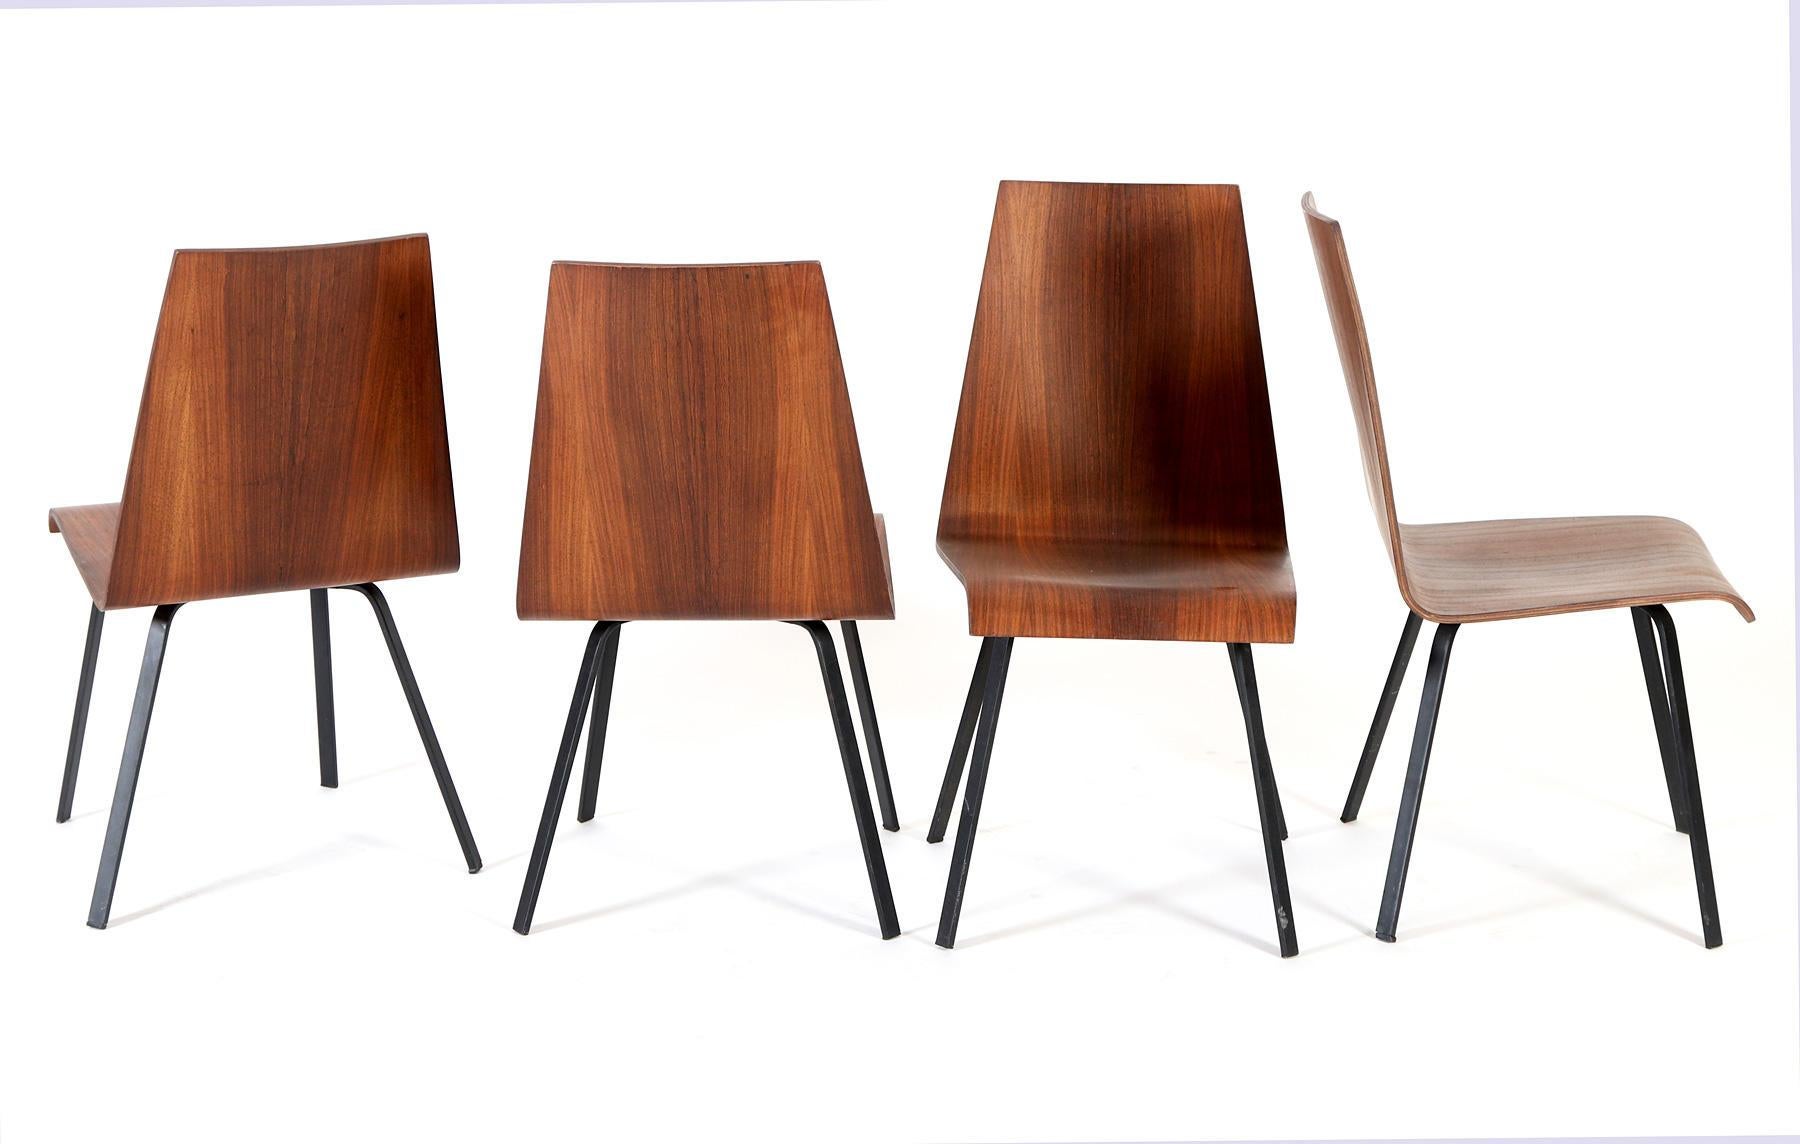 Steel frame black painted with hardwood plywood seat/backrest made in Sweden in the late 1960s.
Set of four, one with small damage on the corner (see picture).